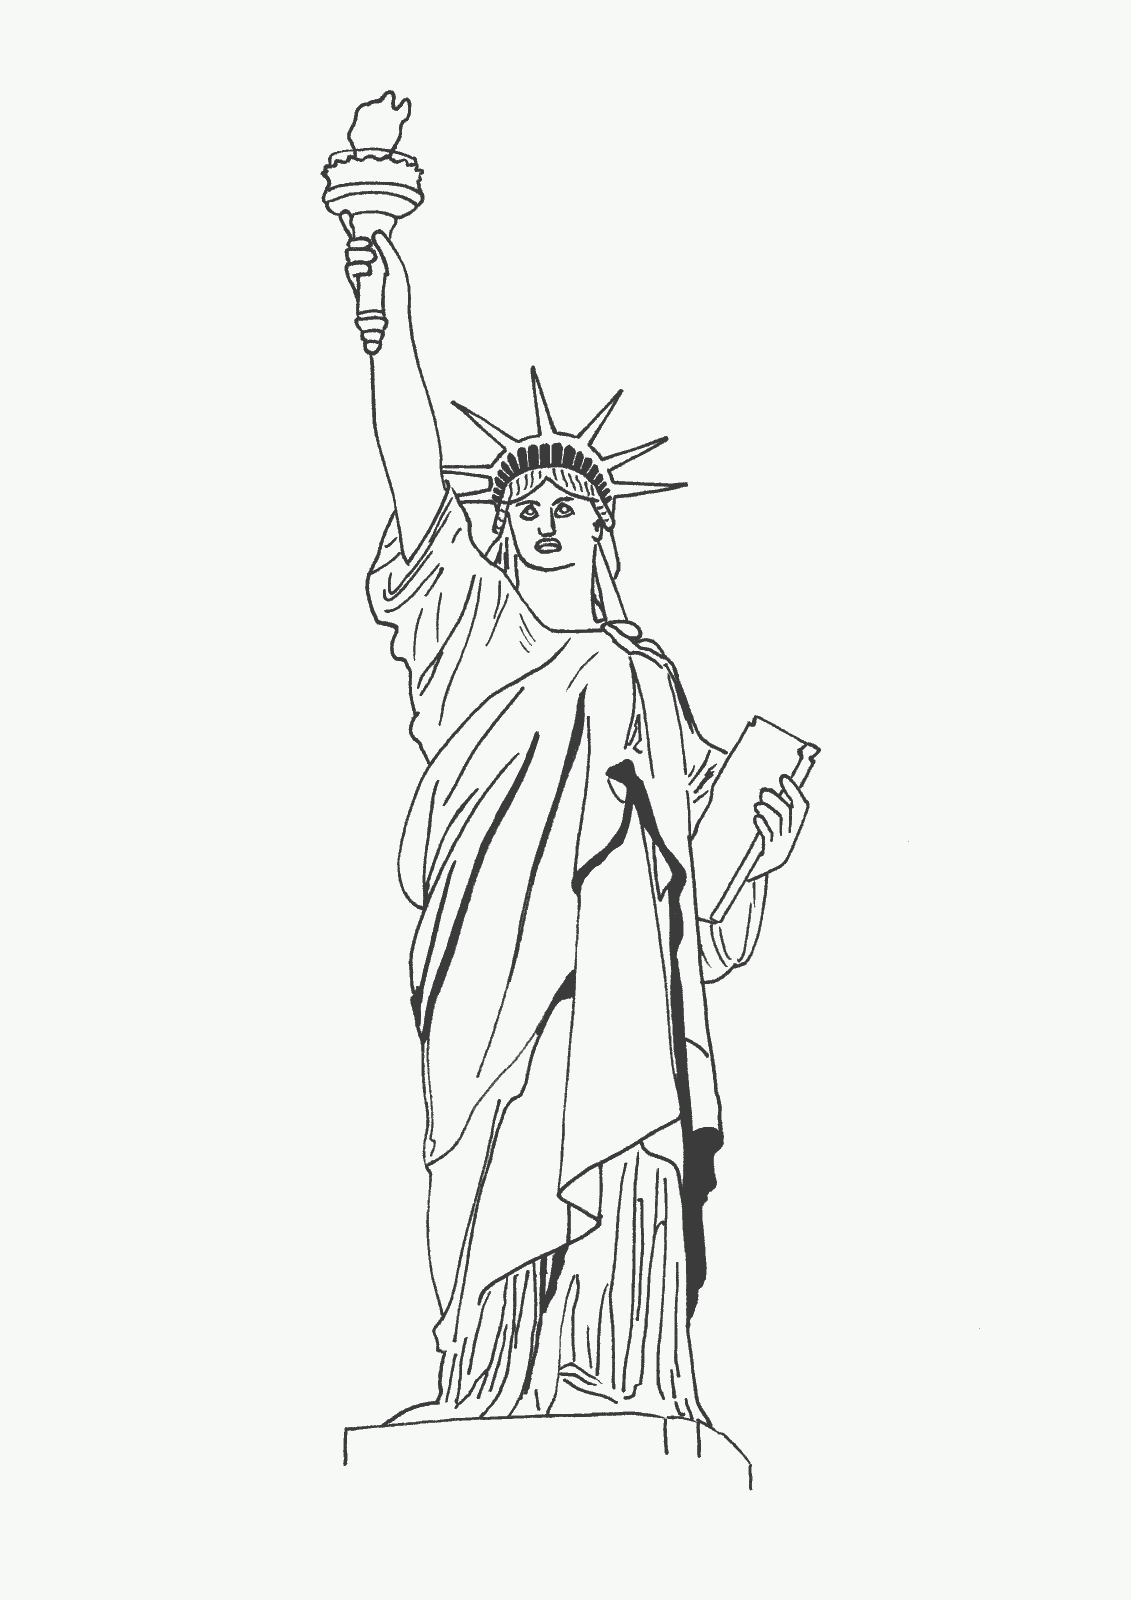 Easy Statue Of Liberty Drawings wallpapers - High quality mobile ...